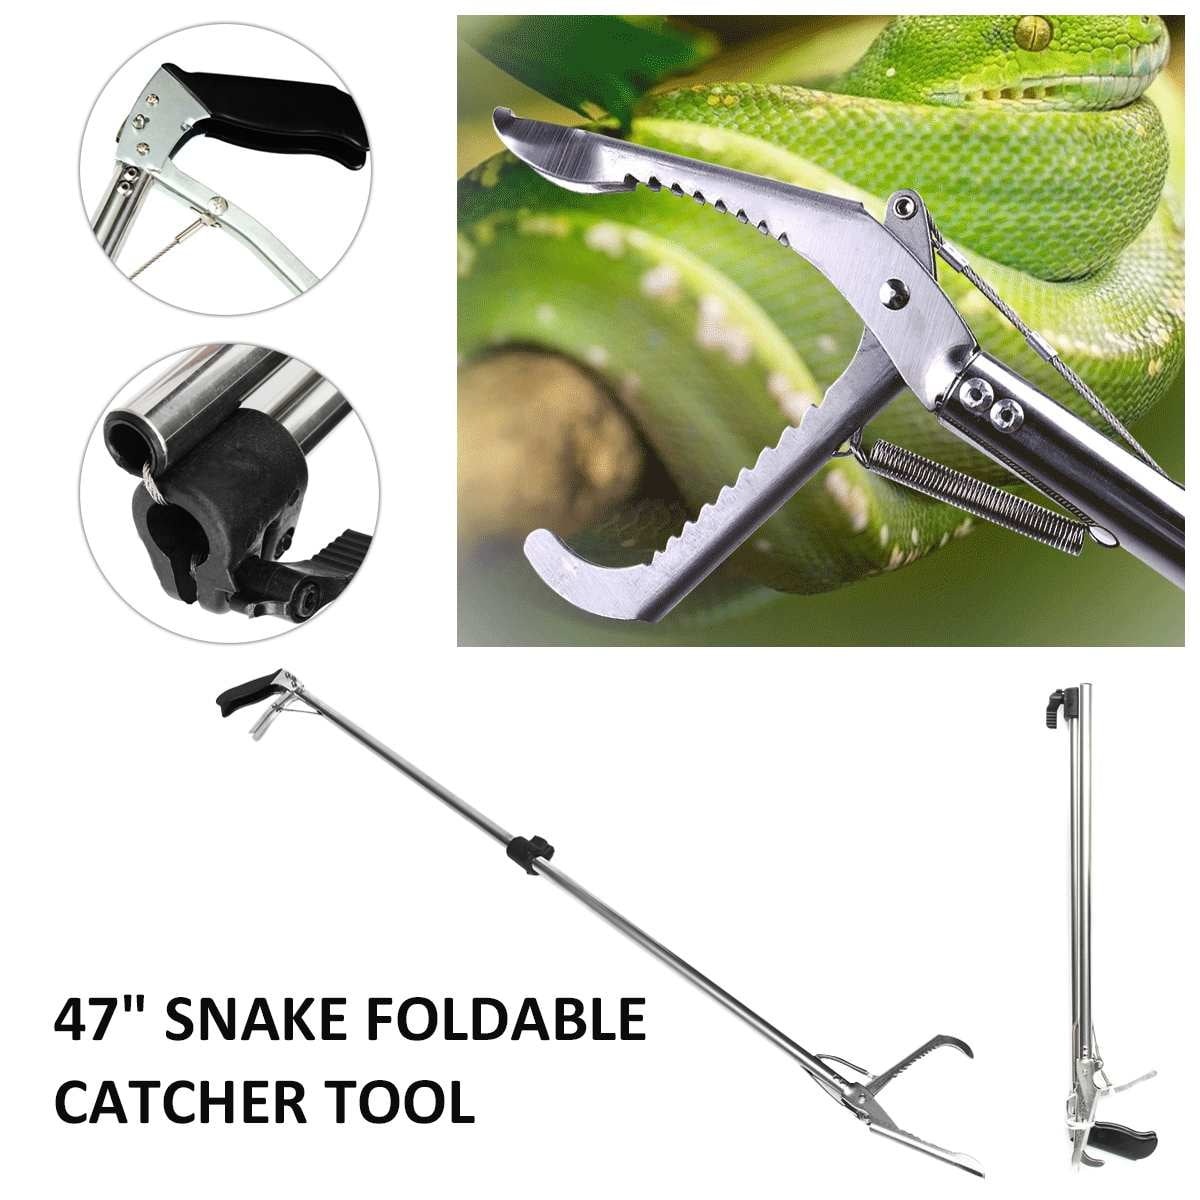 47" Reptile Snake Tongs Stick Foldable Catcher Wide Jaw Tool Heavy Duty